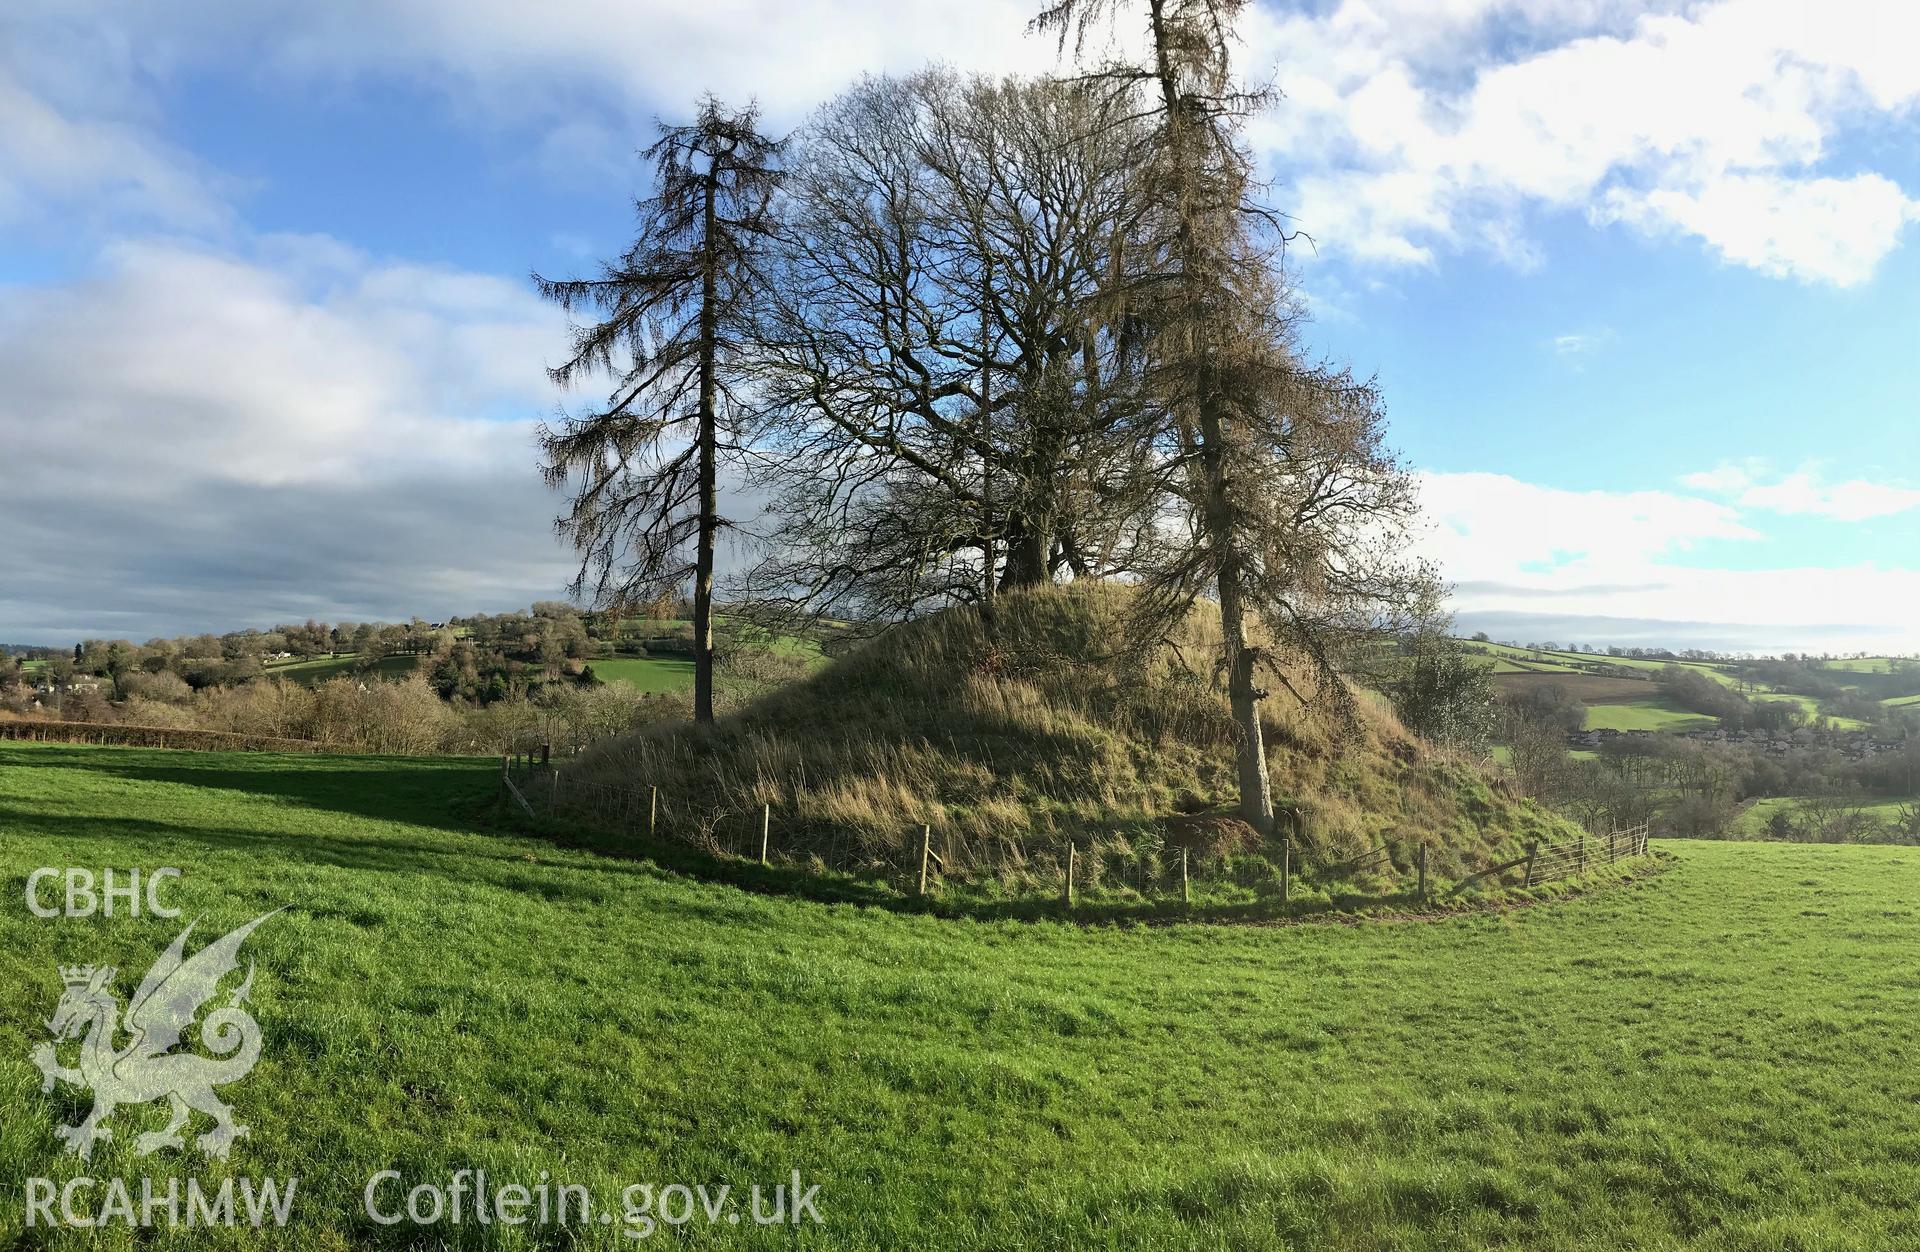 View of the Moat Mound and Bailey, Crucorney. Colour photograph taken by Paul R. Davis on 1st January 2019.